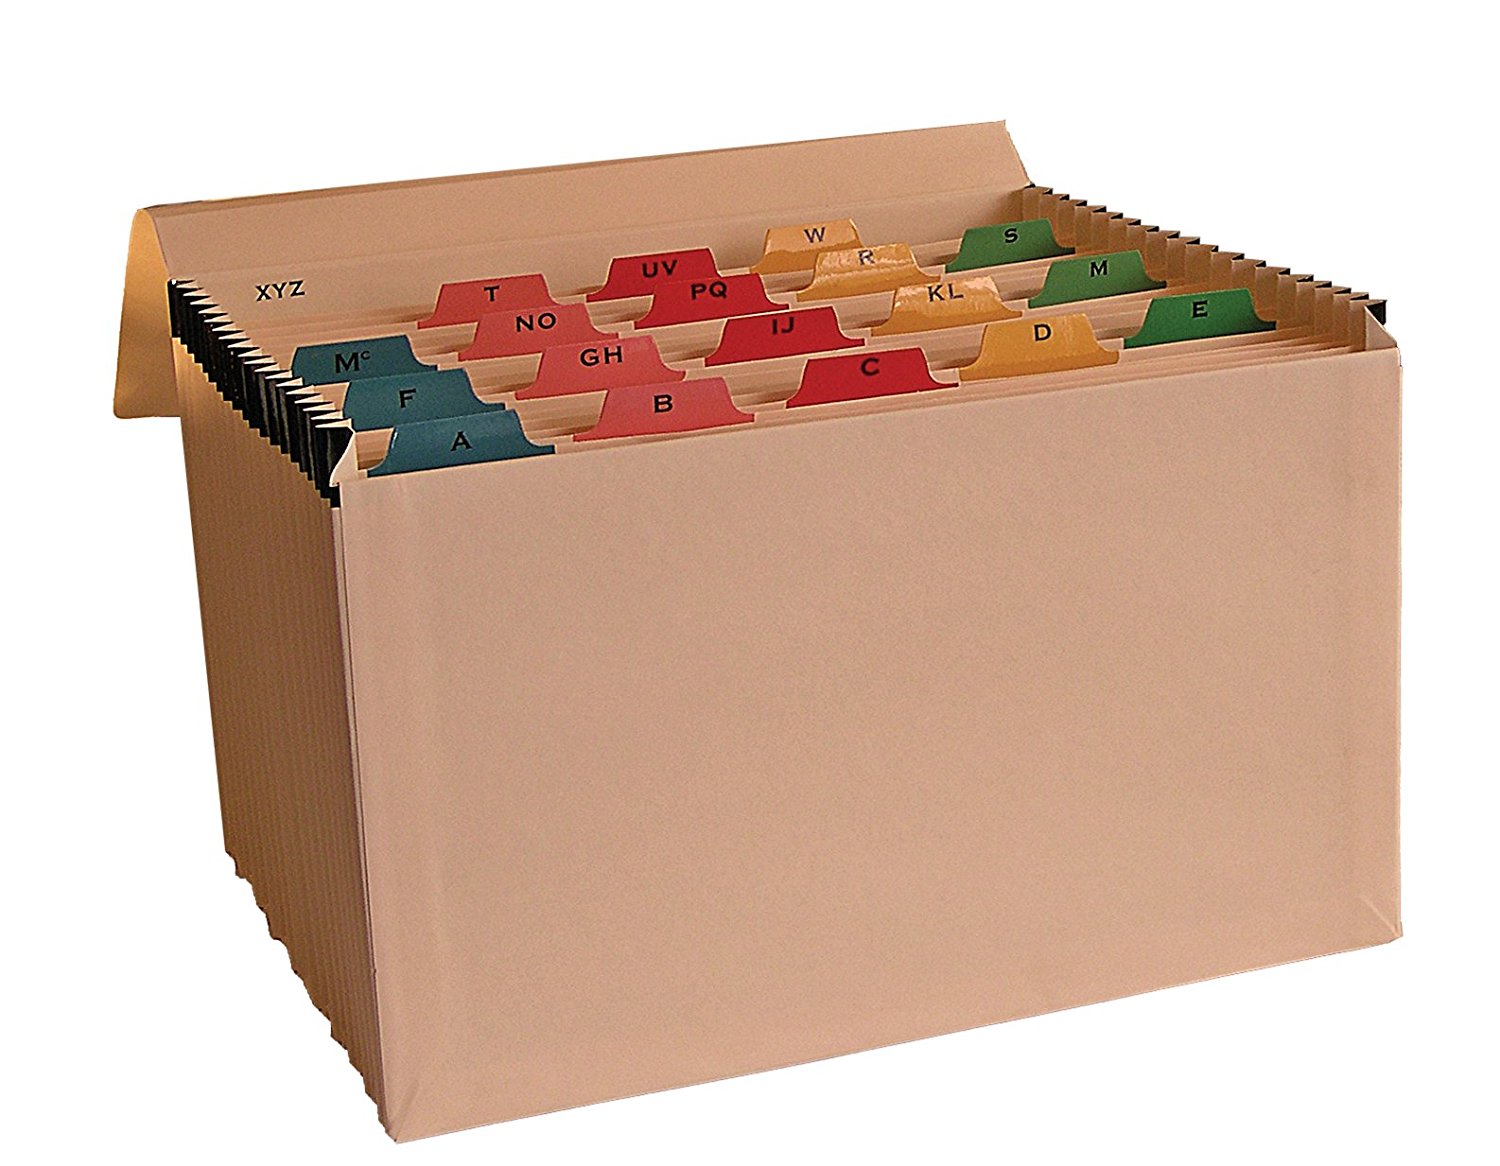 Cathedral Expanding File Manilla Mylar Reinforced 19 Pocket Labelled A-Z Buff